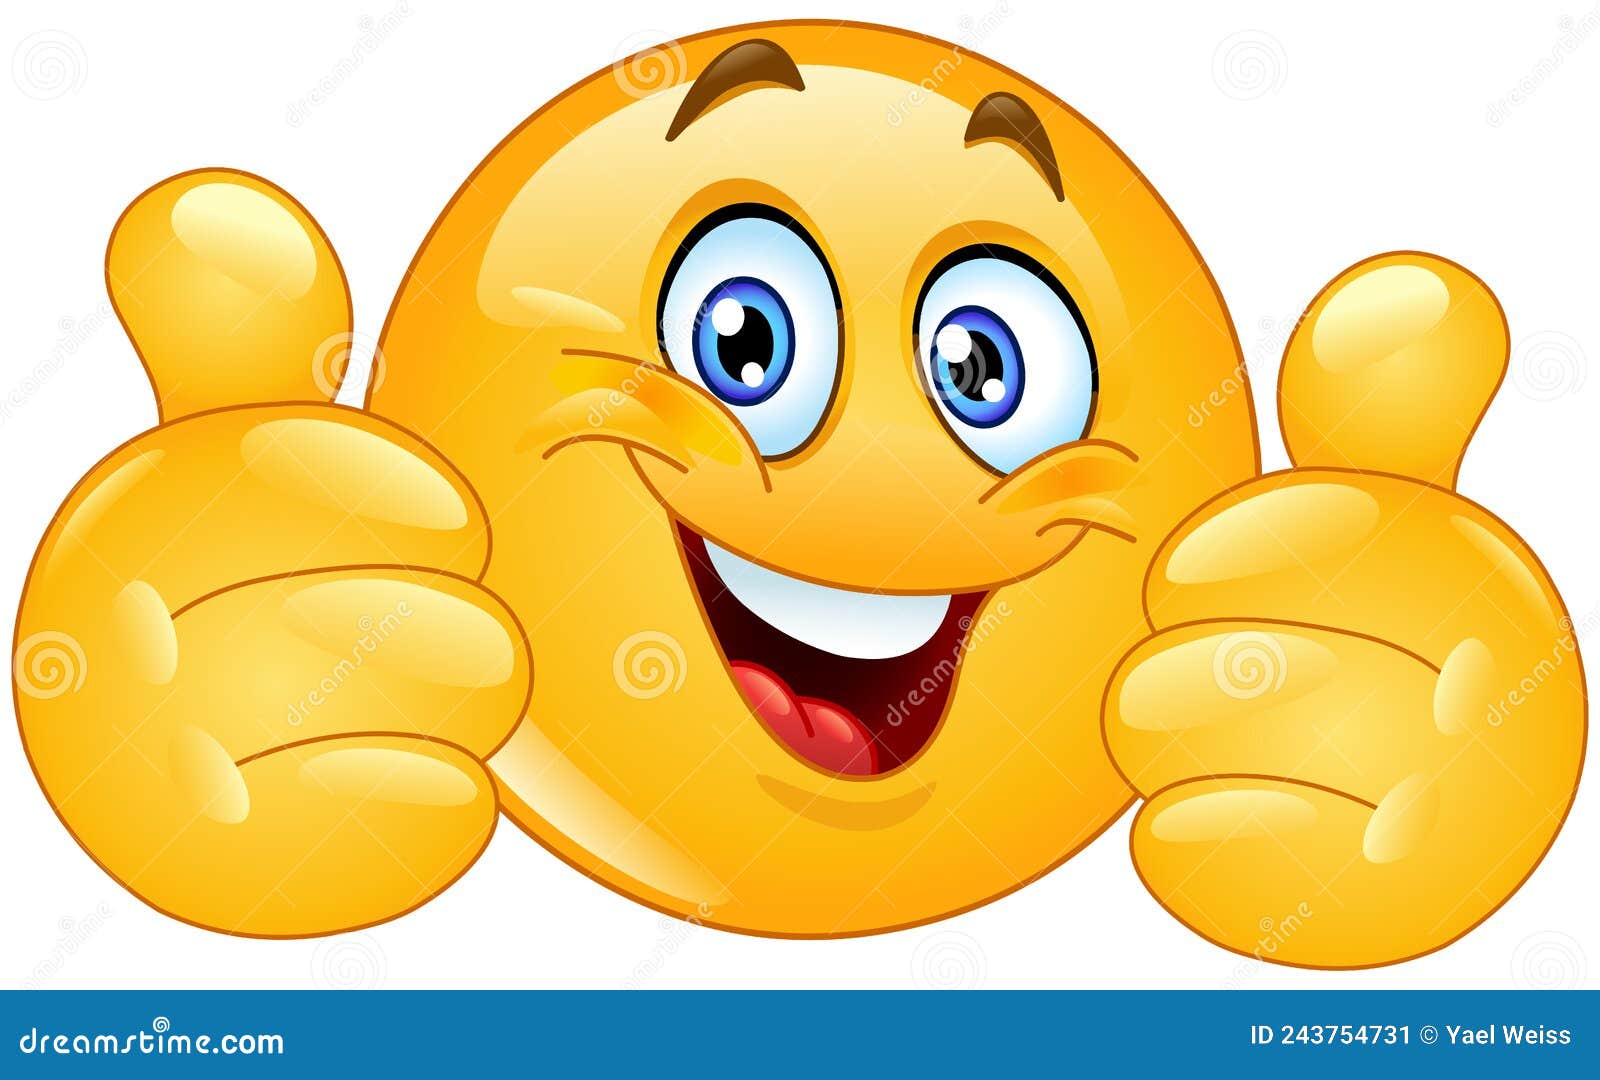 Double Thumbs Up Emoticon Stock Vector. Illustration Of Gesture - 243754731